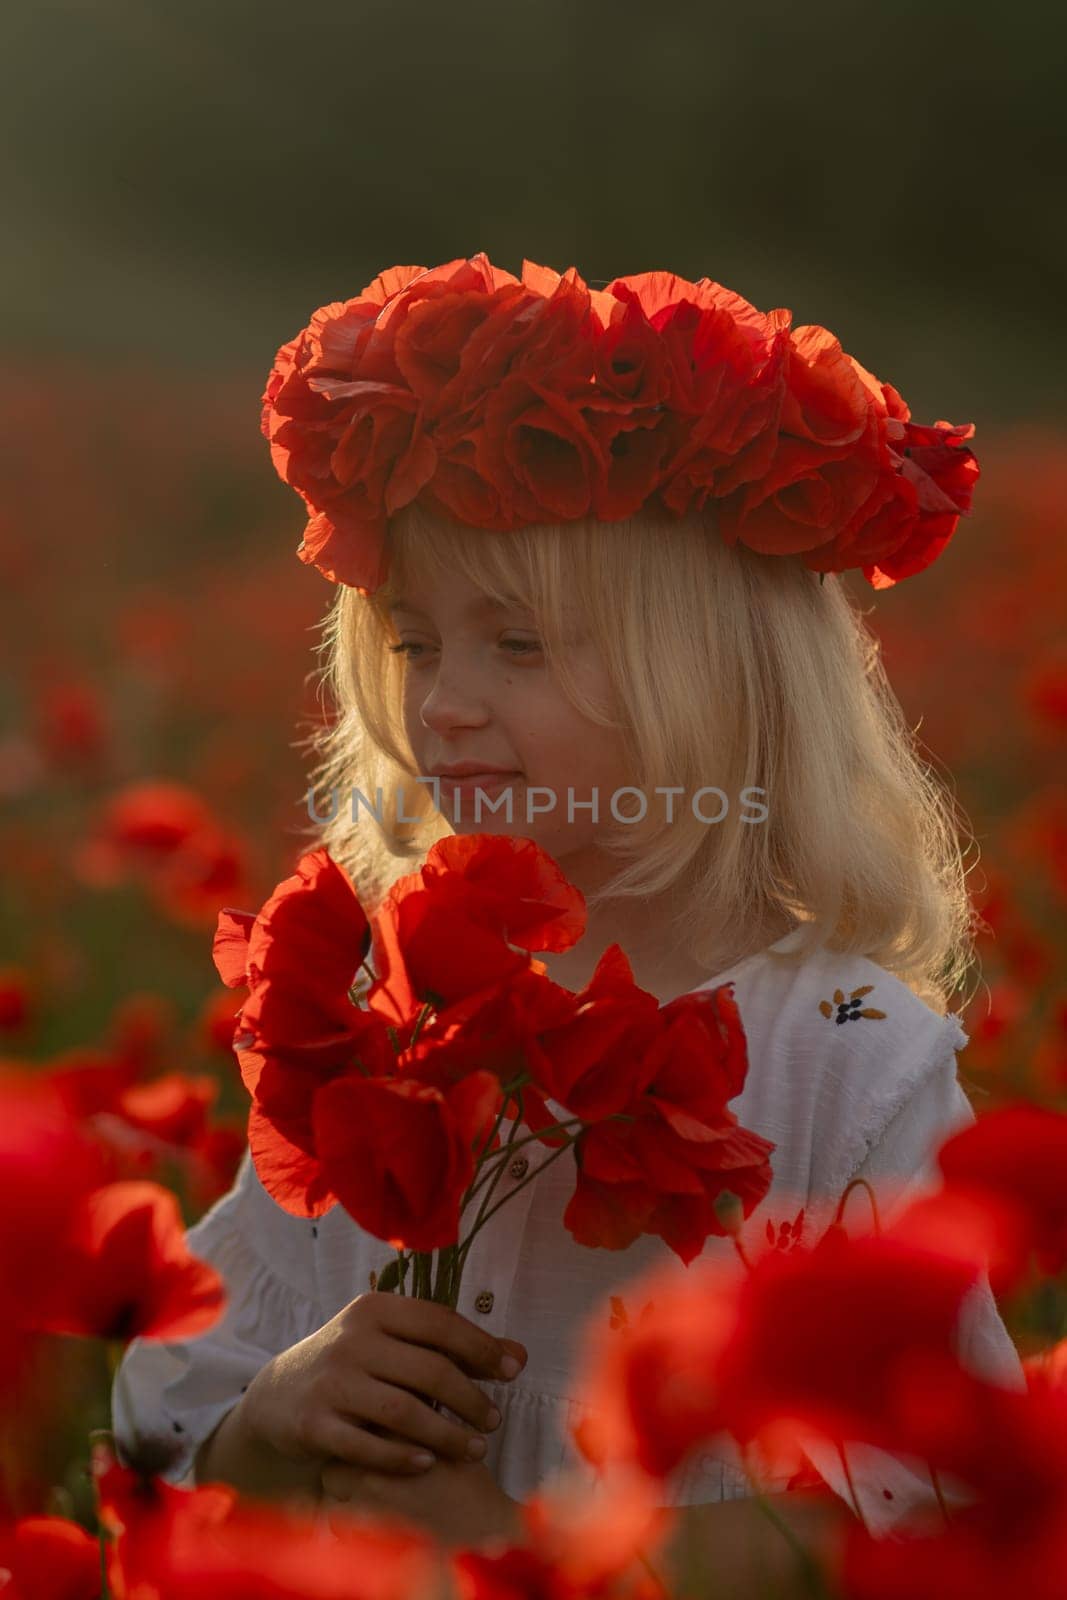 A young girl wearing a red flower crown is standing in a field of red flowers. She is holding a bouquet of red flowers in her hand. Concept of innocence and joy